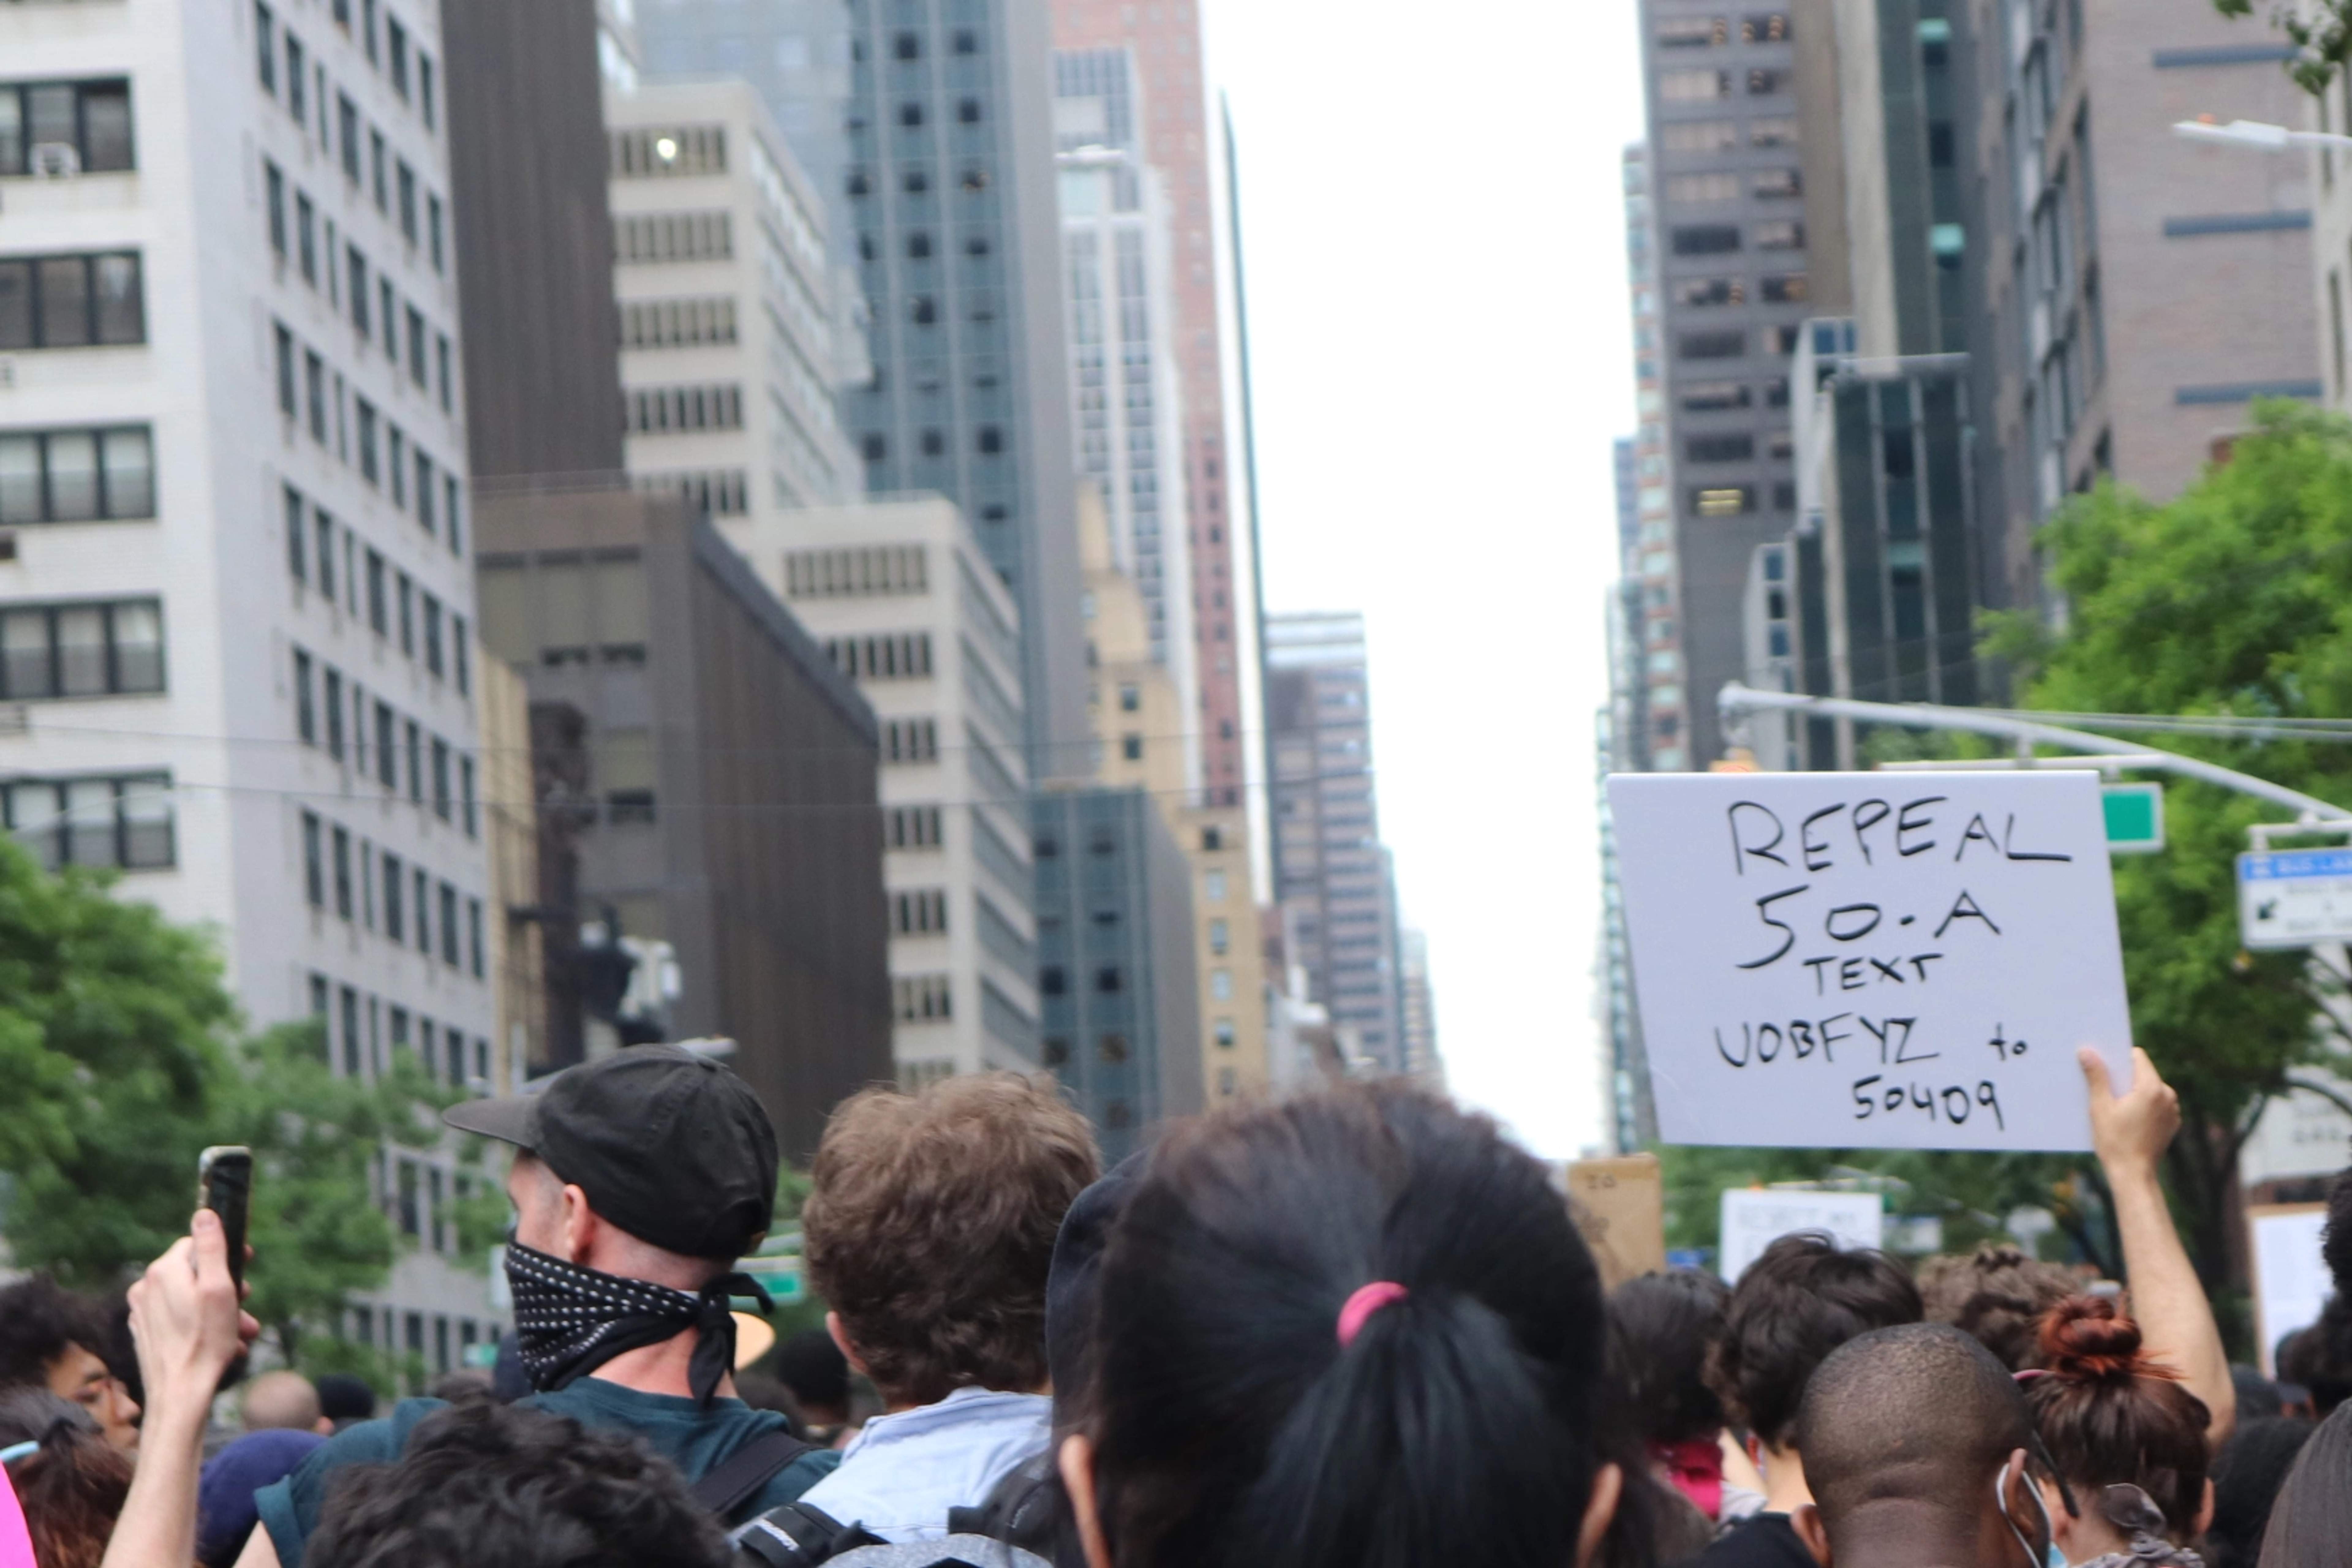 Crowded protest in New York City featuring a protestor holding a sign that reads "Text UOBFYZ to 50409"